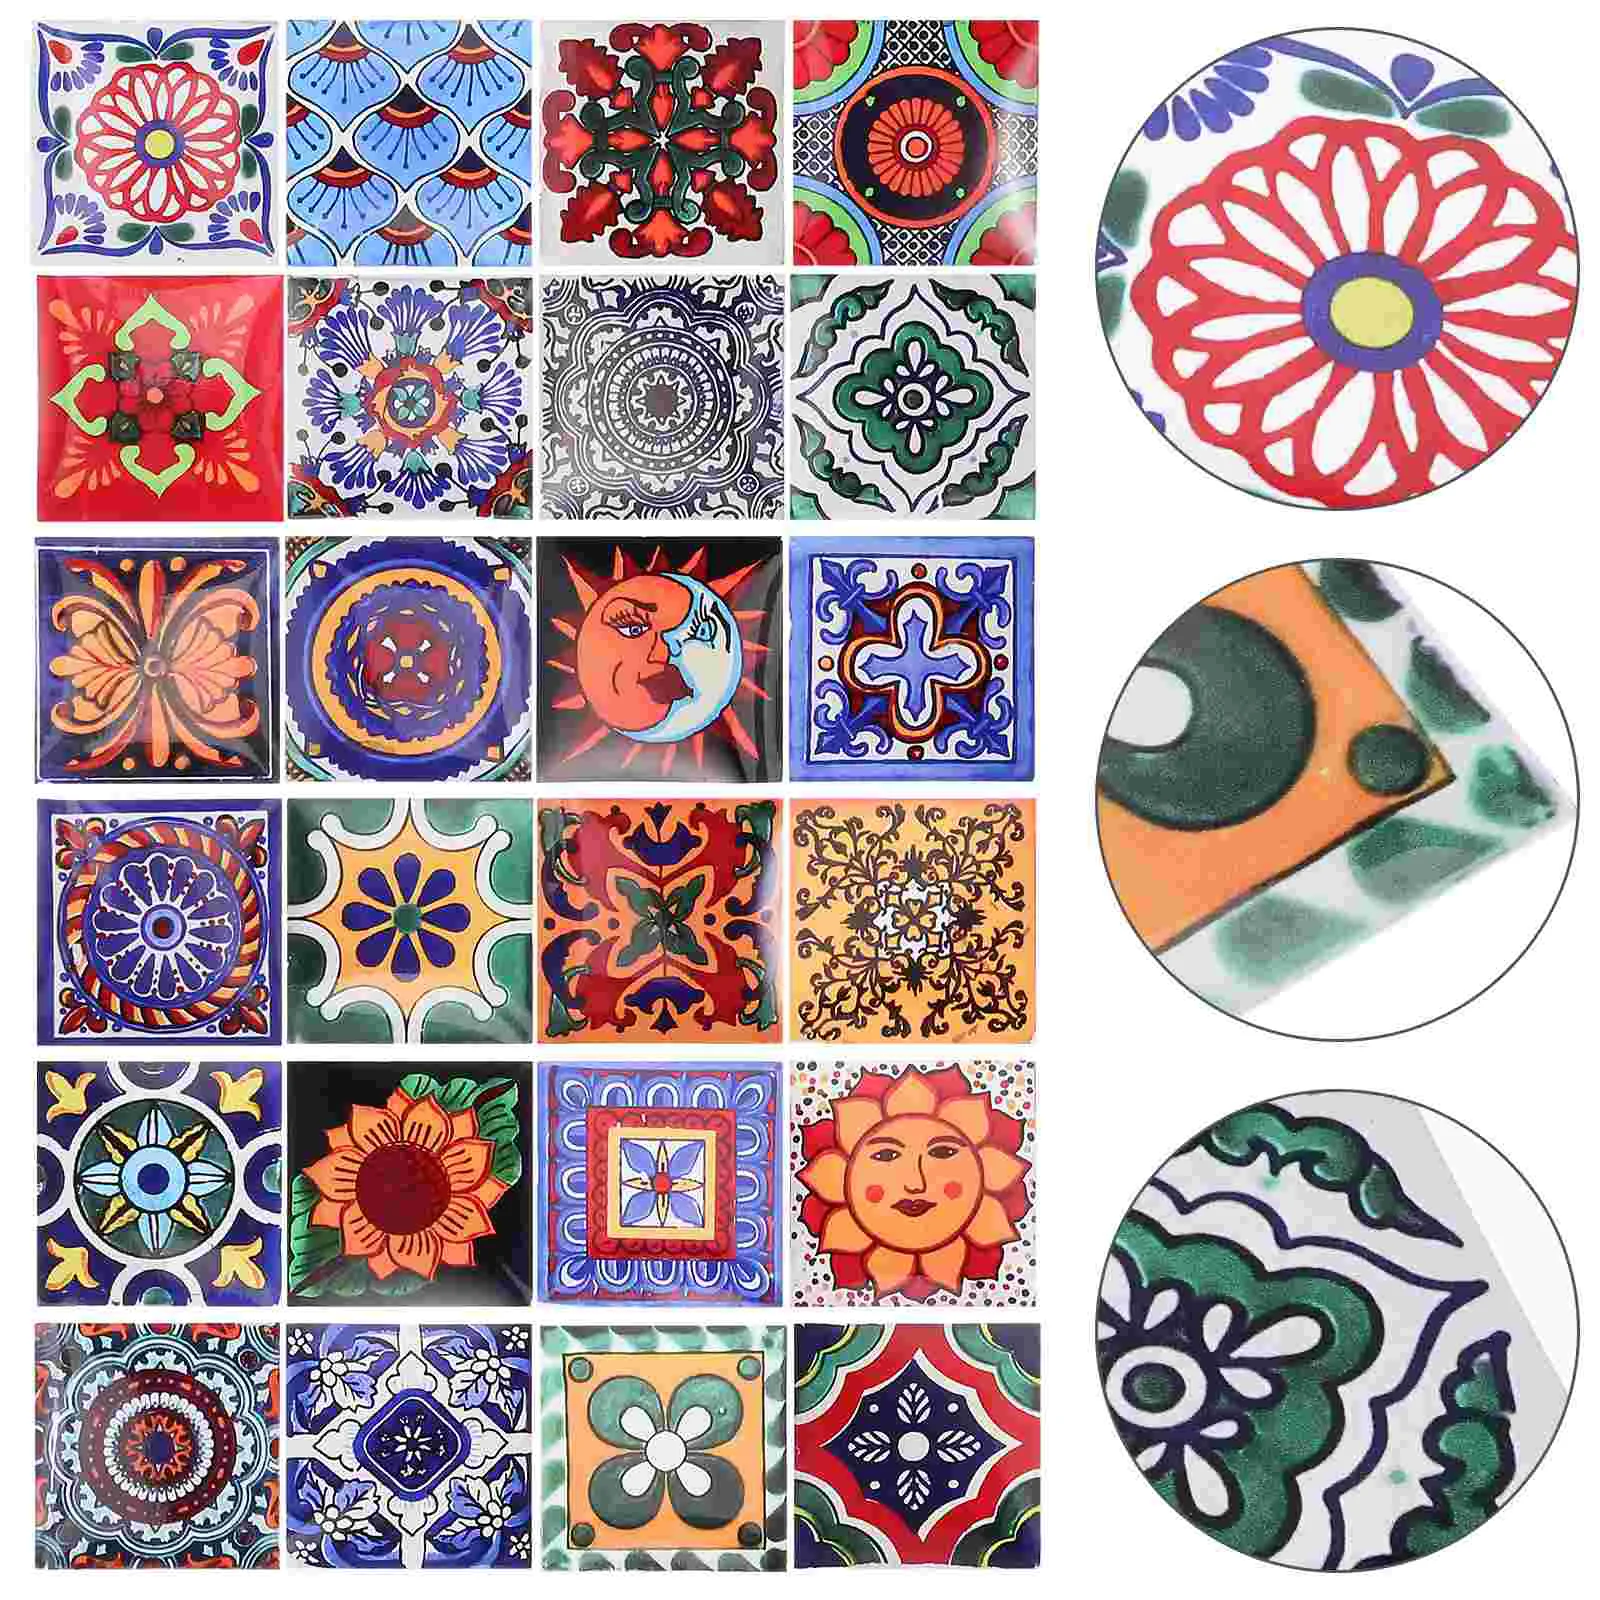 

24 Sheets Water Proof Vintage Tile Stickers Mandala Tiles Decals Pvc Kitchen Wall Peel